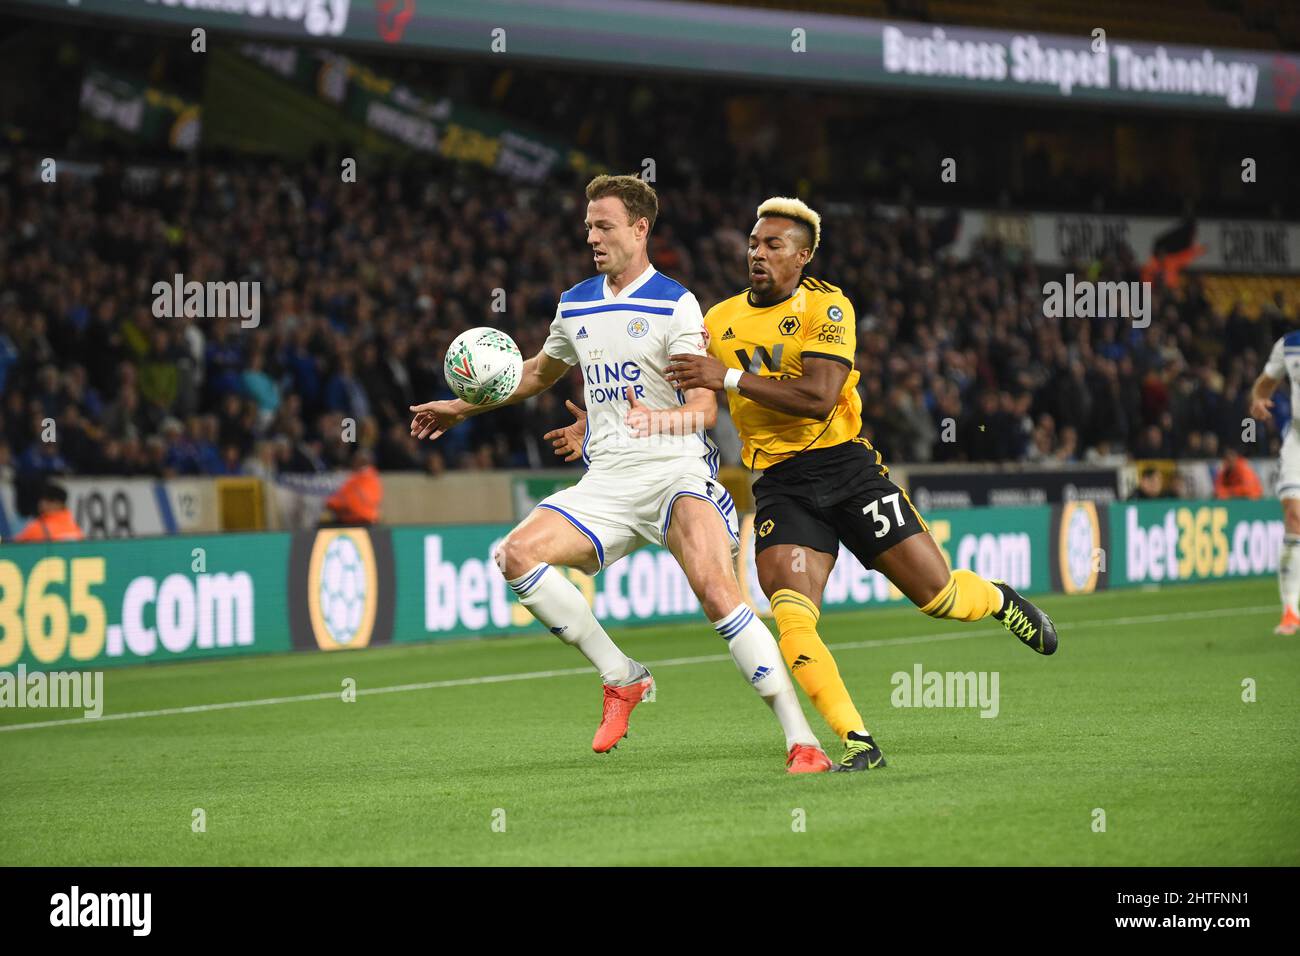 Adama Traore of Wolverhampton Wanderers and Jonny Evans of Leicester City. Wolverhampton Wanderers v Leicester City at Molineux 25/09/2018 - Carabao Cup Stock Photo